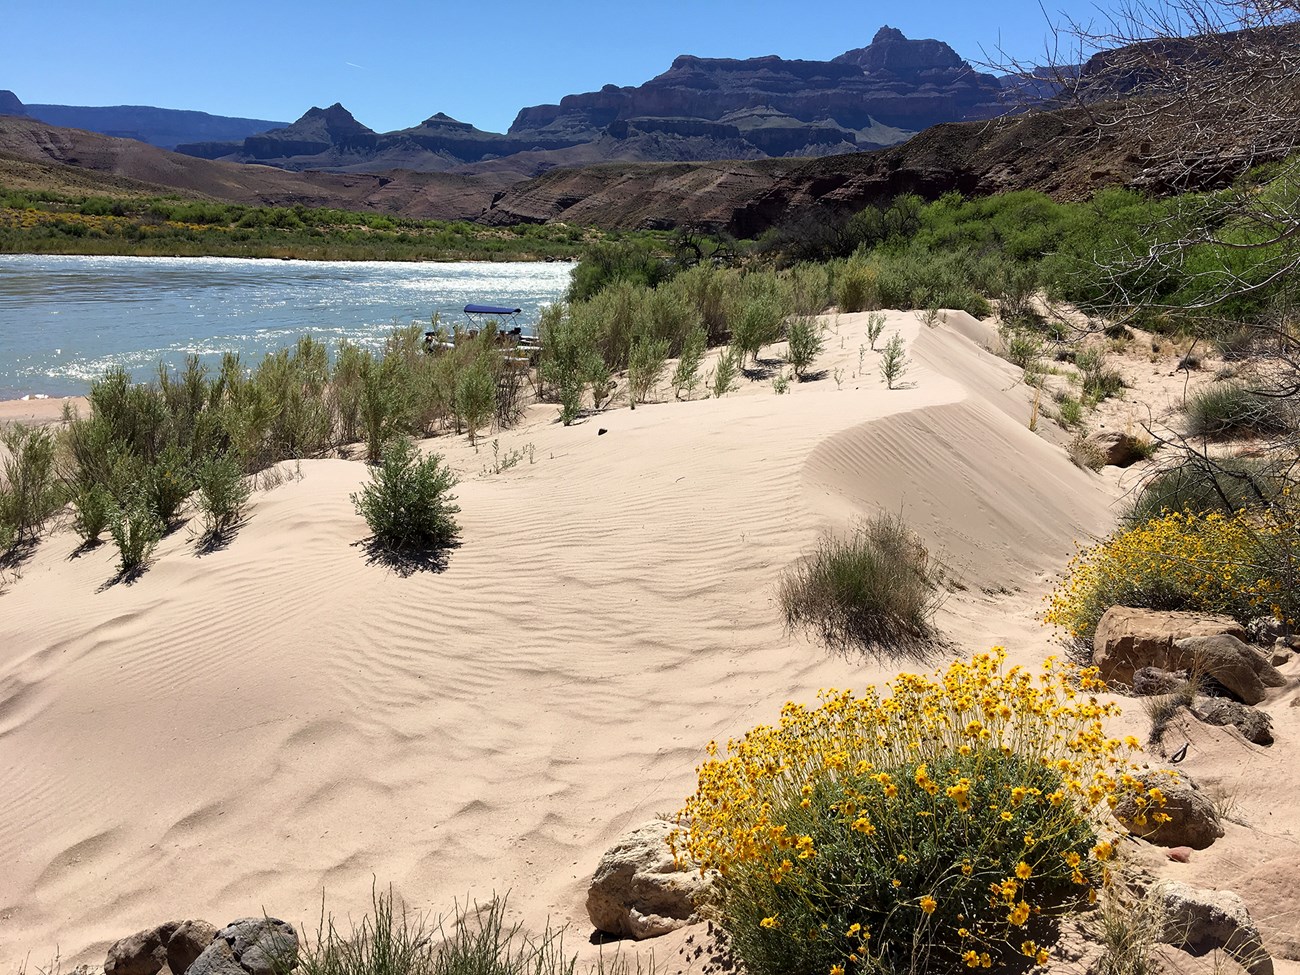 Sand dunes covered with plants, some with blooming yellow flowers. A blue river and red bluffs are seen on the far shore.